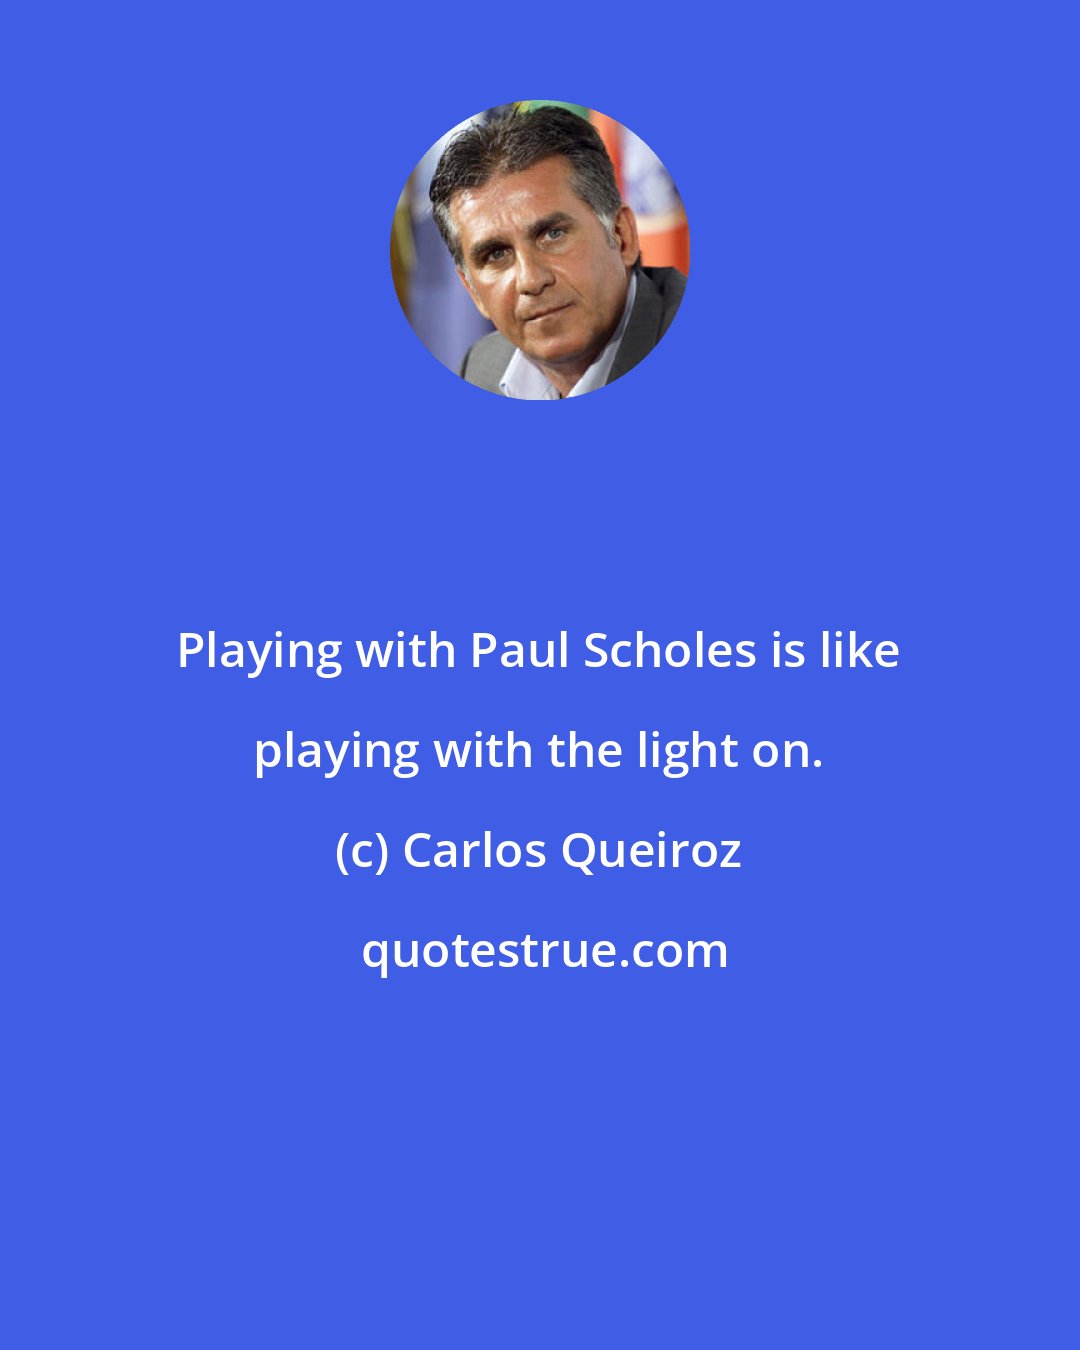 Carlos Queiroz: Playing with Paul Scholes is like playing with the light on.